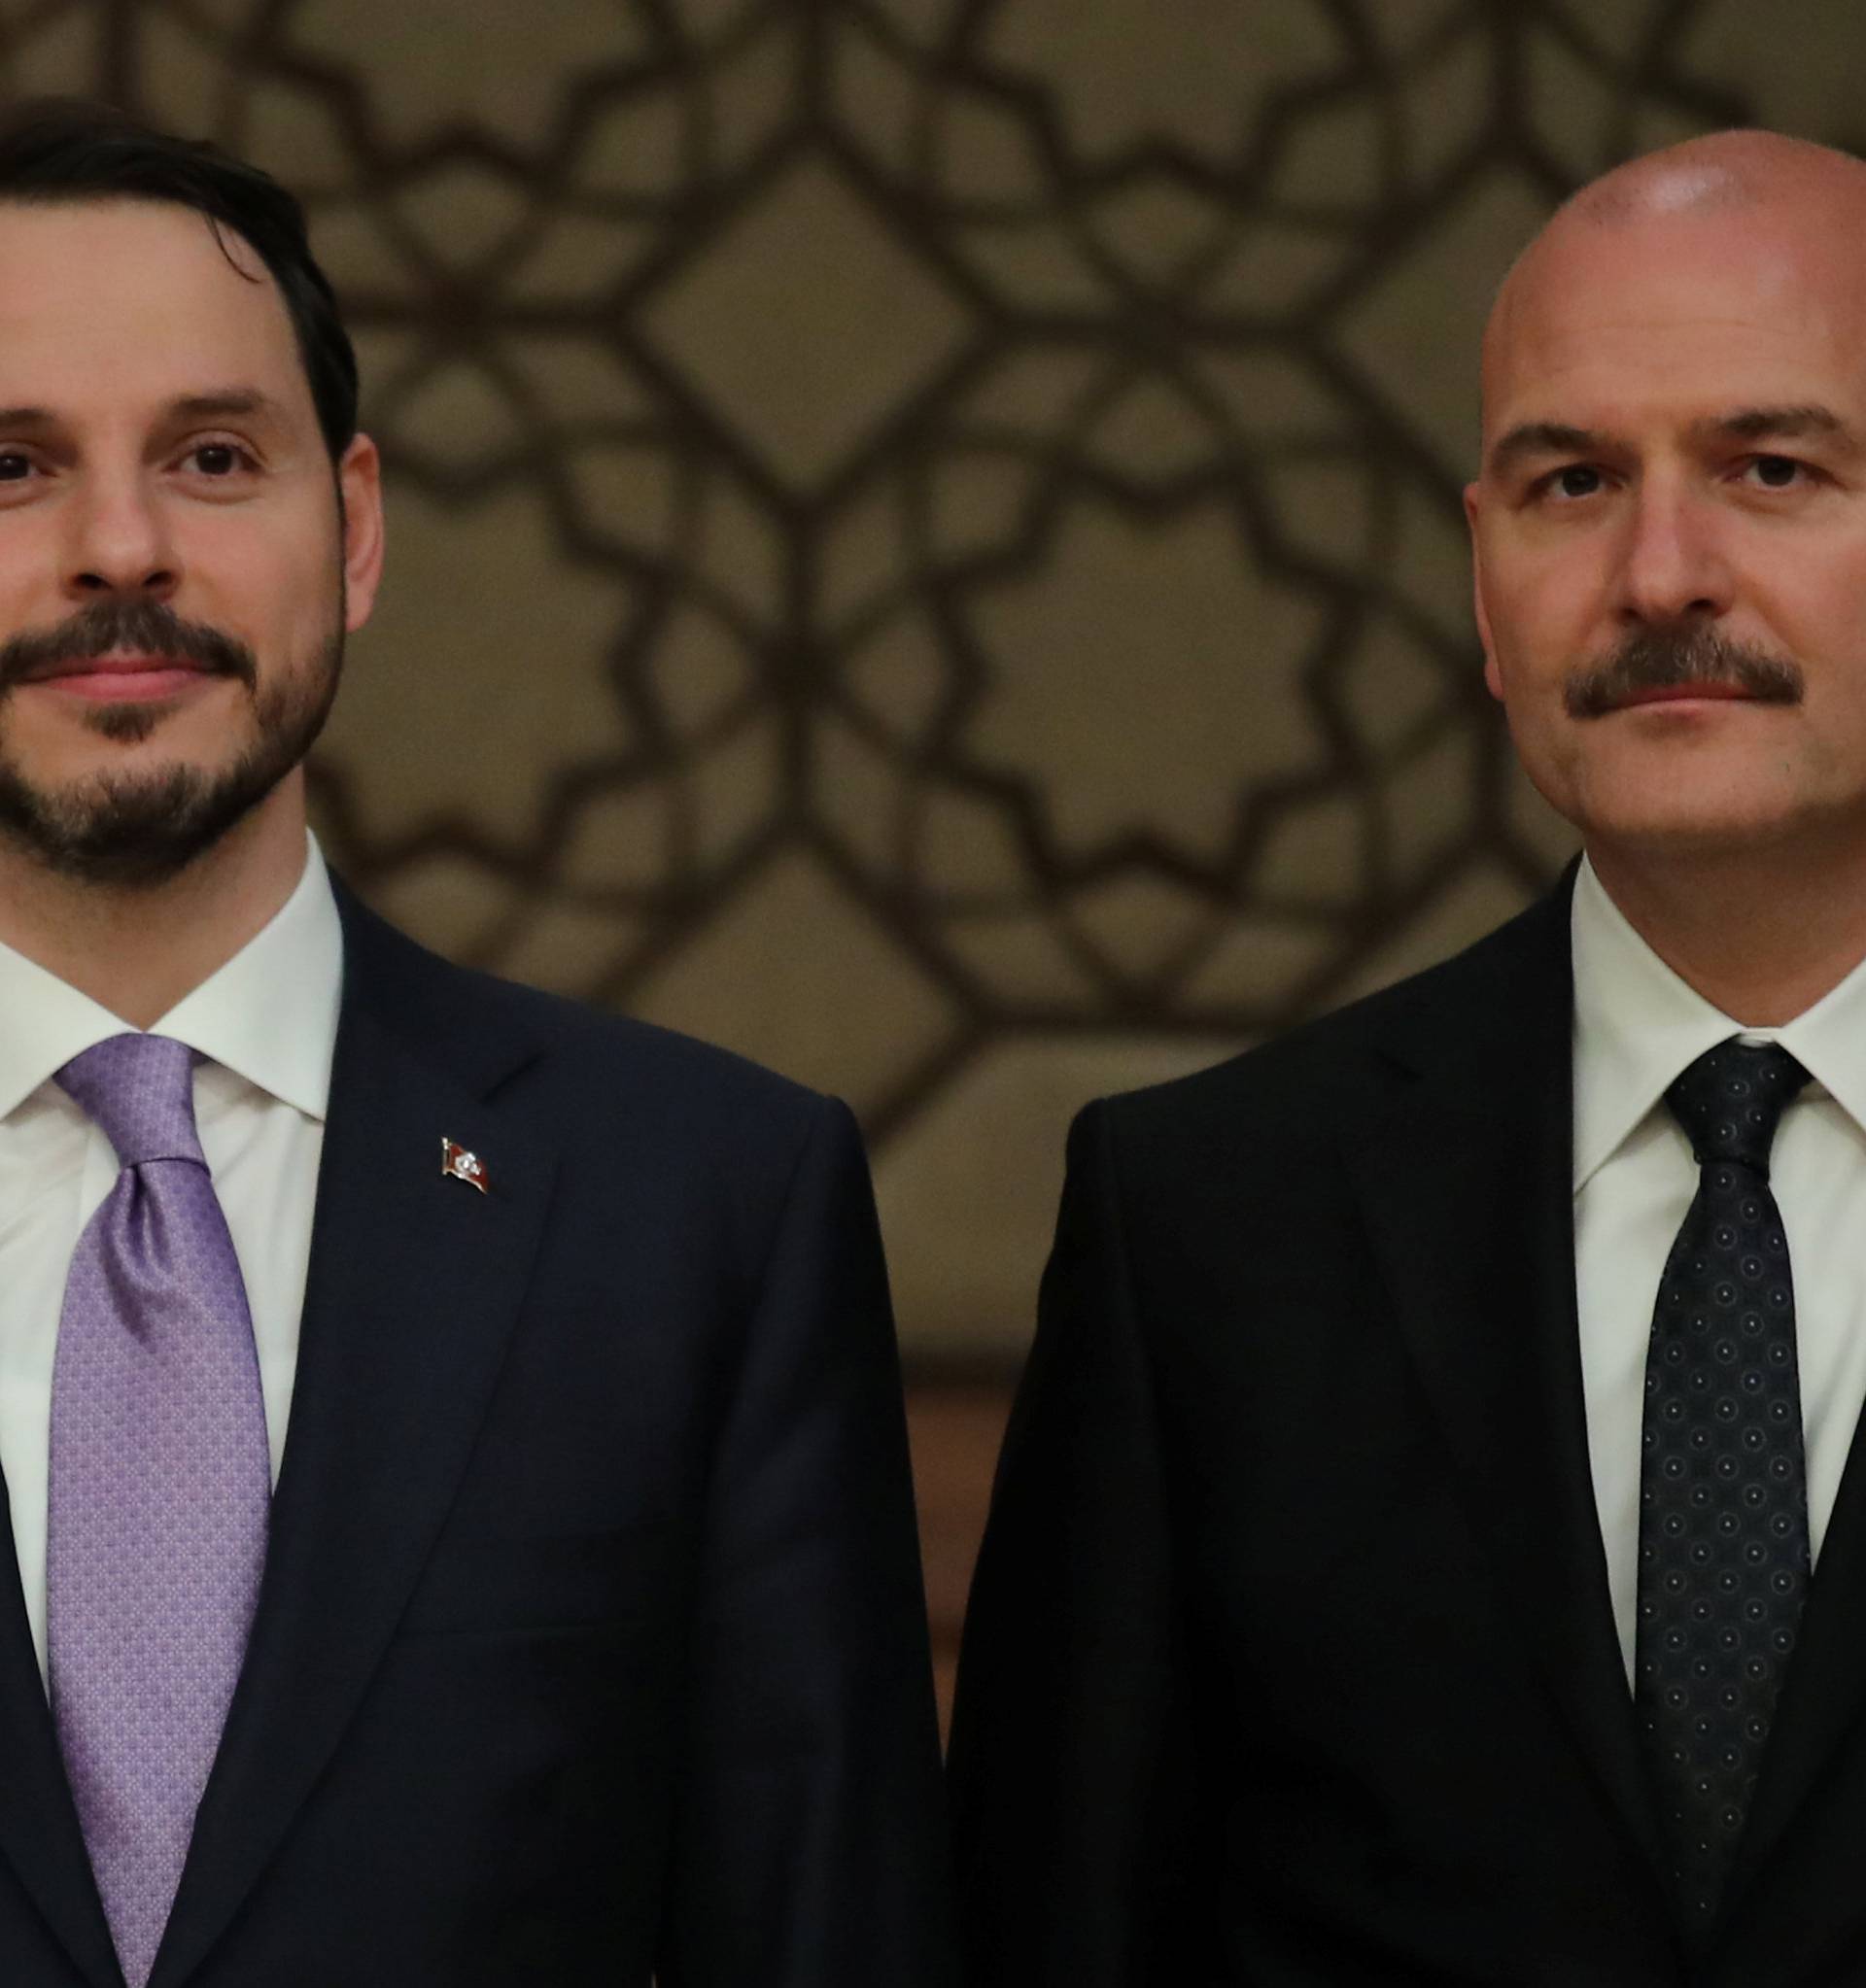 Turkish President Tayyip Erdogan's son-in-law and newly appointed Treasury and Finance Minister Berat Albayrak and Interior Minister Suleyman Soylu stand next to each other during a presser at the Presidential Palace in Ankara